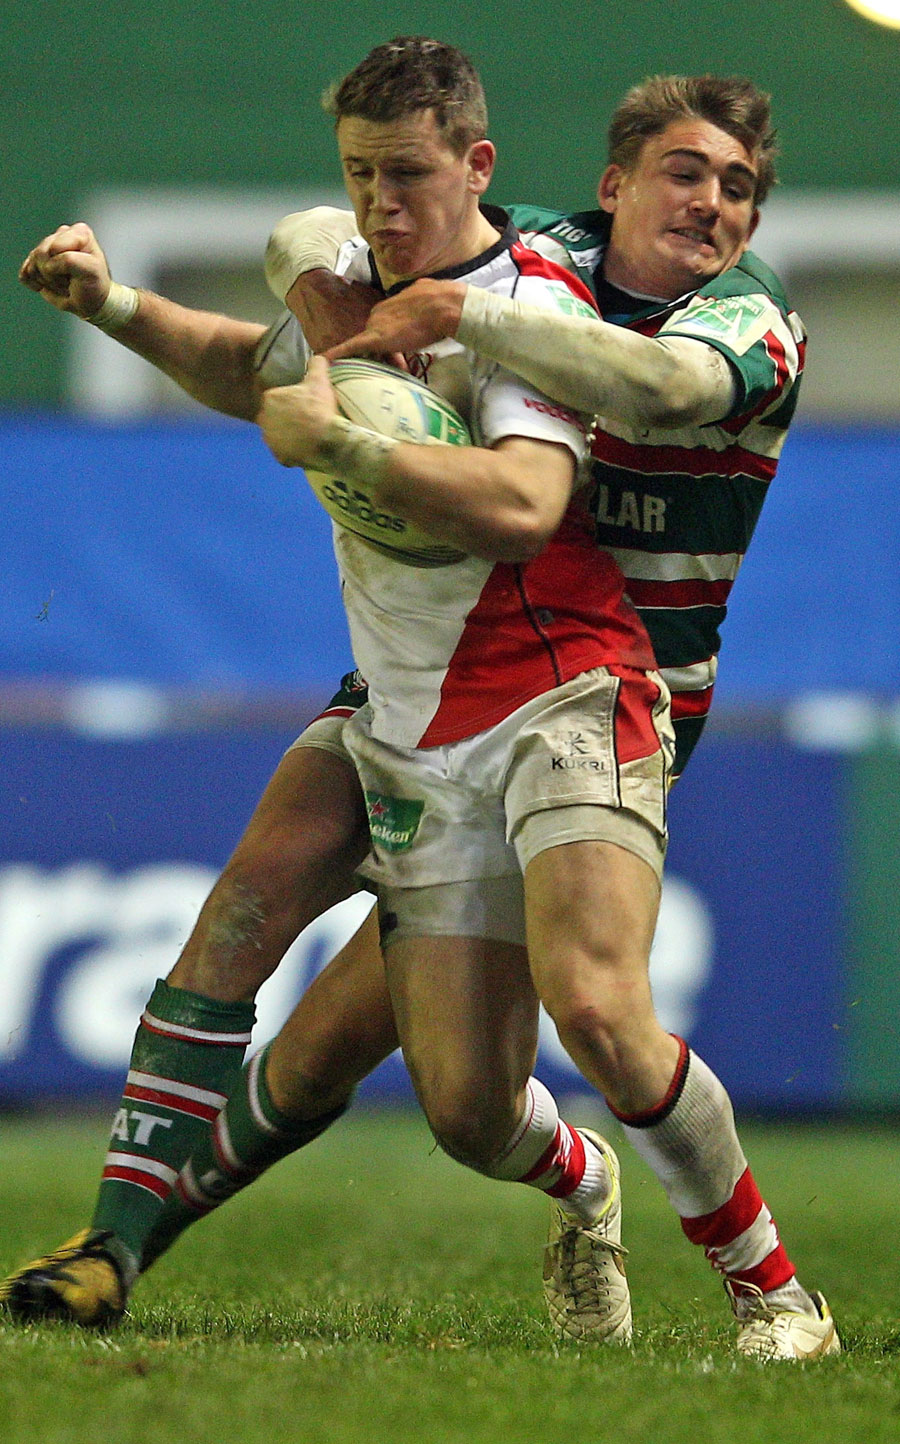 Leicester's Toby Flood tackles Ulster's Craig Gilroy